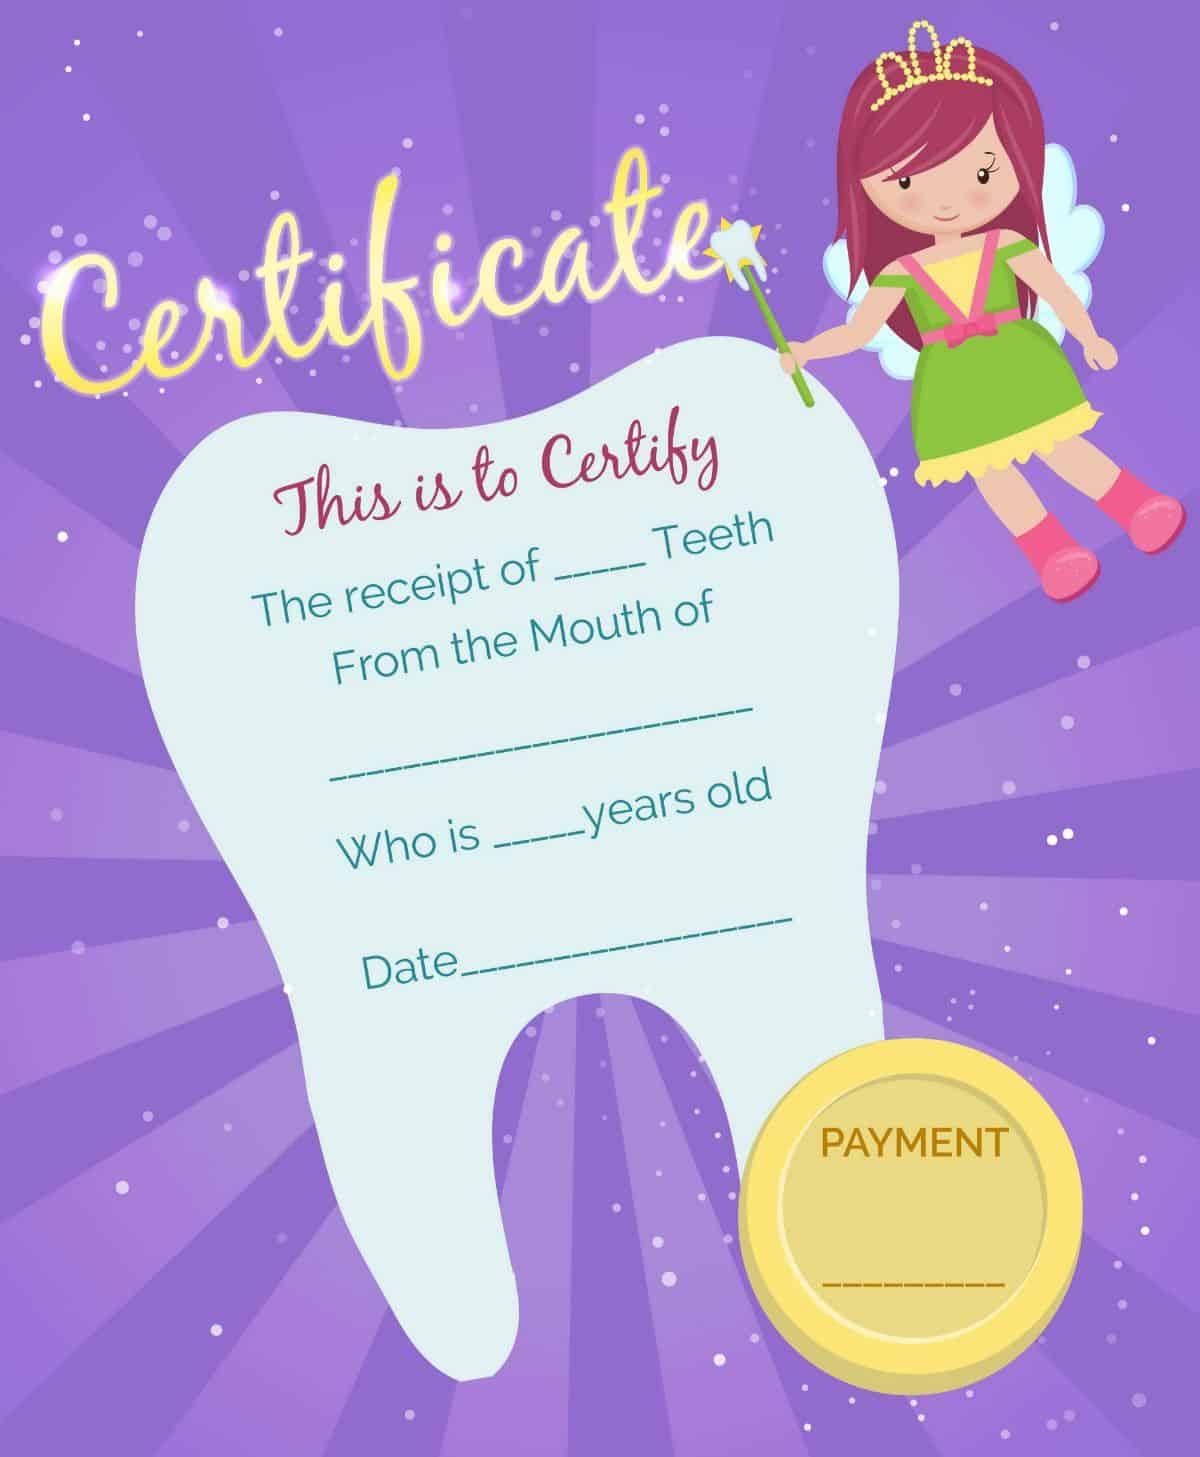 Tooth Fairy cetificate poster.